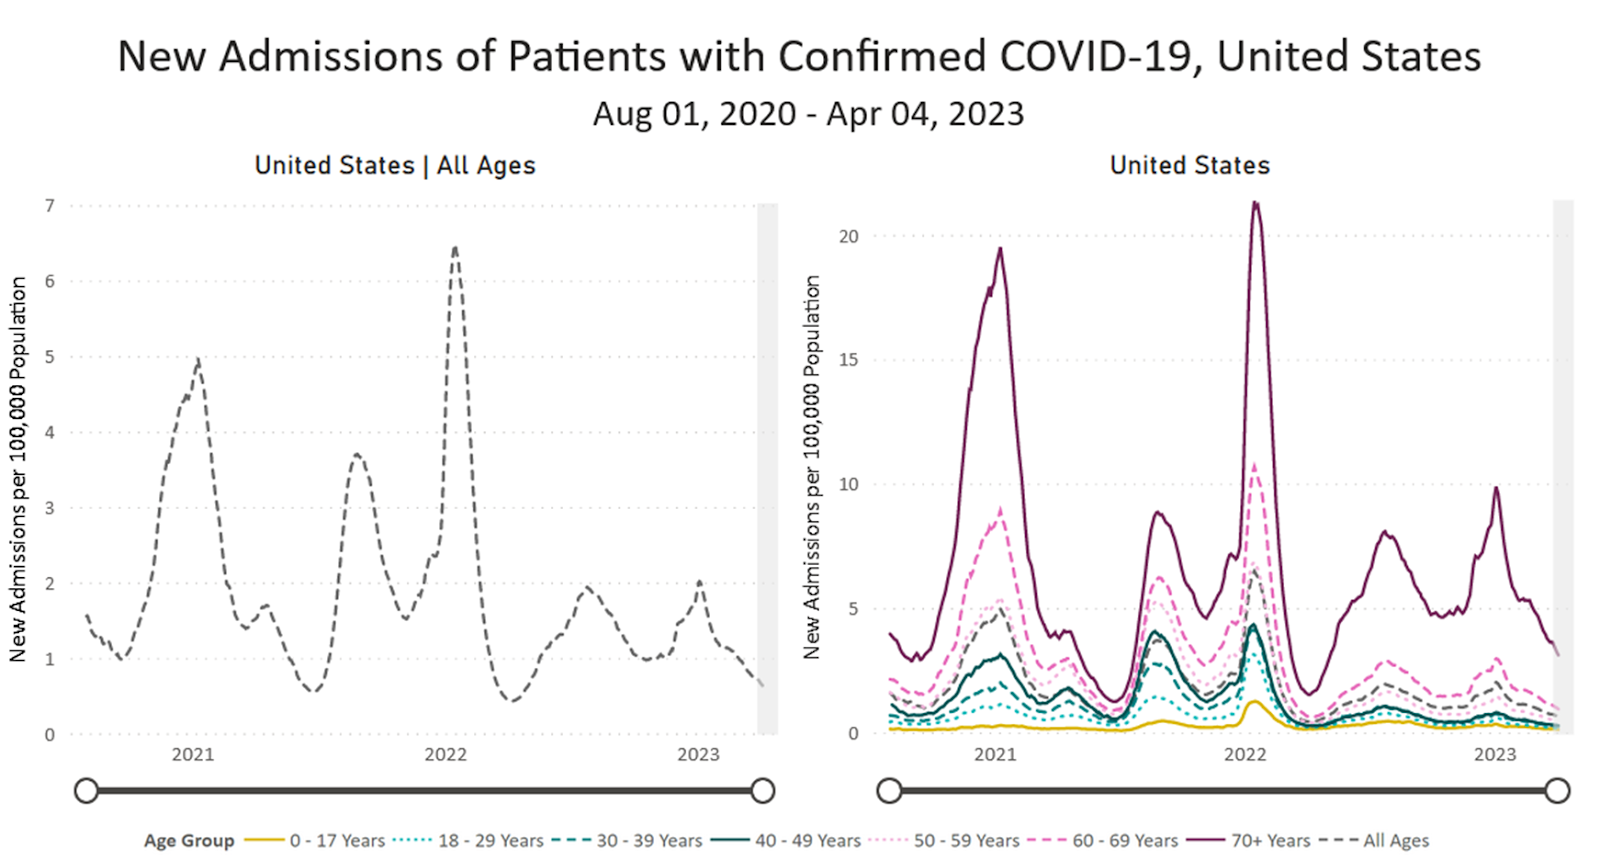 Image of line graphs titled “New Admissions of Patients with Confirmed COVID-19” from August 1, 2020 to Apr 4, 2023. A line graph showing hospitalizations for all ages is on the left, and is broken down by age group on the right. The y-axis is labeled “New Admissions per 100,000 Population” and ranges from 0 to 7 for all ages and 0 to 20 by age group. The x-axis is time from August 1, 2020 to Apr 29, 2023. Current hospitalizations are at a rate of 0.63 per 100,000 people. 70+ (solid red-purple) is the highest for the whole graph with a larger gap within the last year, followed by 60-69 (dashed dark pink), and then progressively decreasing by decade, with the last 2 groups being 0-17 years (solid gold) and 18-29 years (dashed light cyan). In the last month, all ages are slightly decreasing. Age 70+ admissions are at about 3.11 per 100,000. The other age groups are about 1 or less.